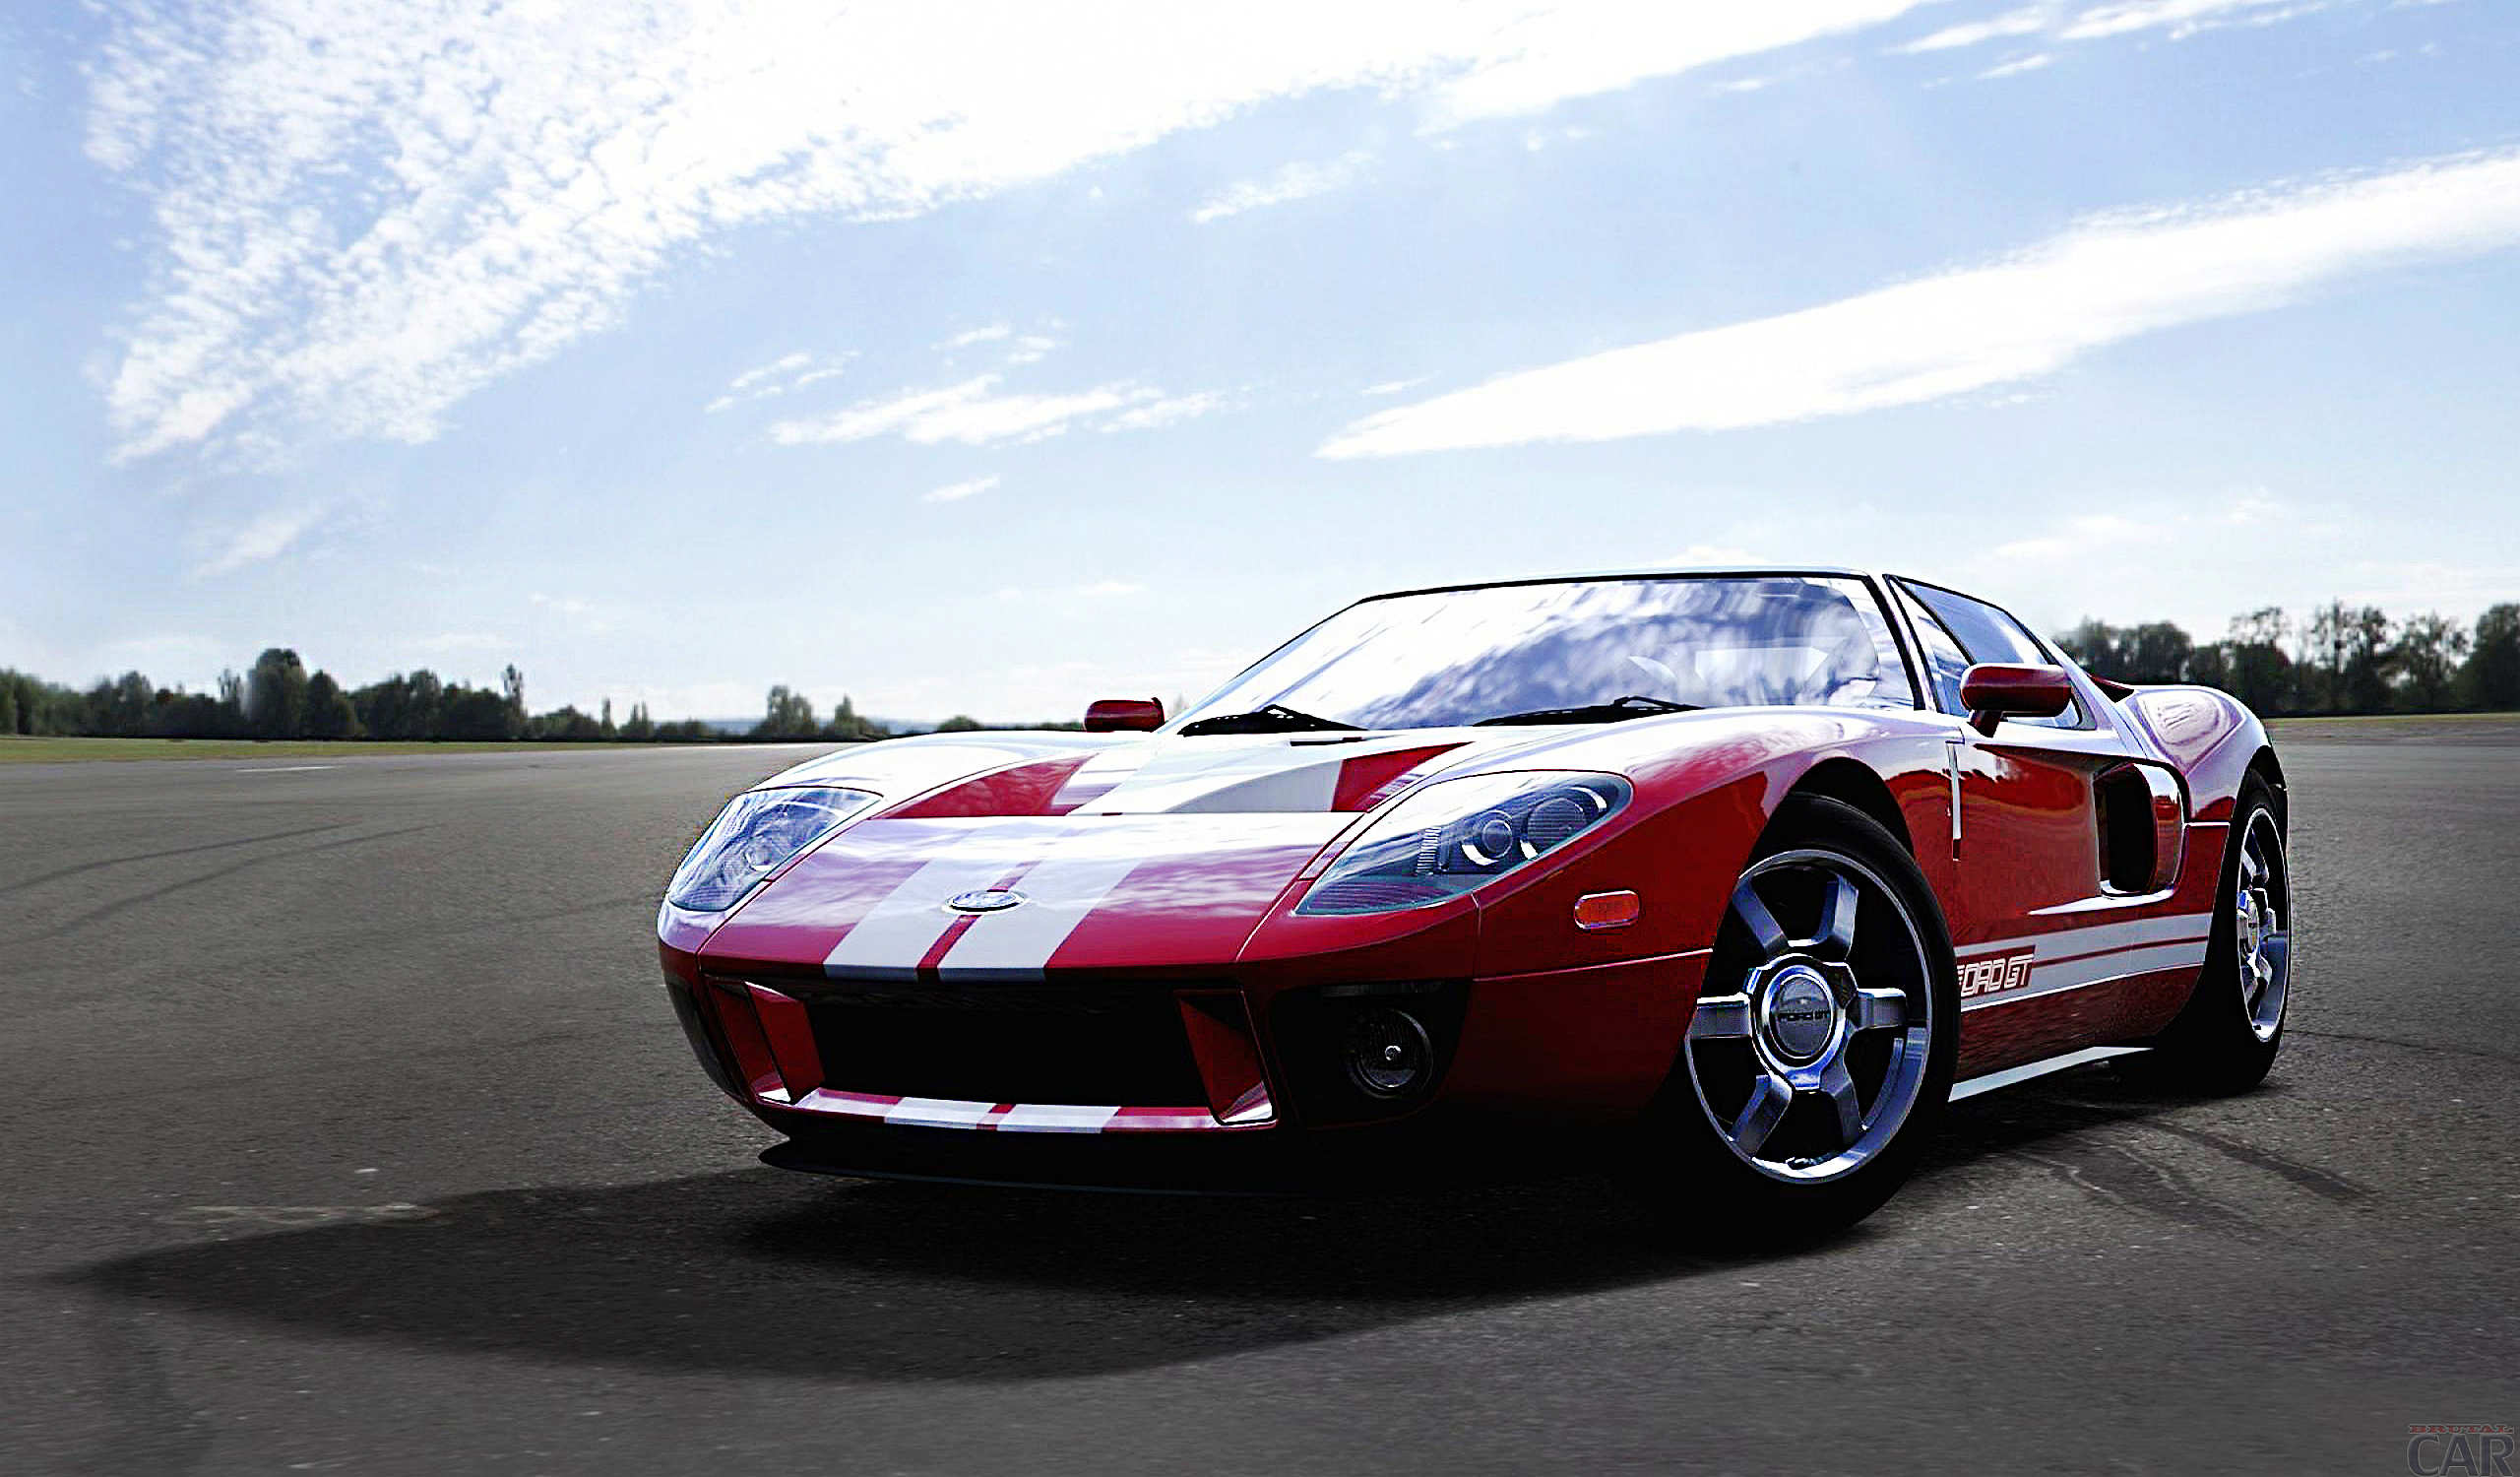 Ford GT wallpaper. Download backgrounds